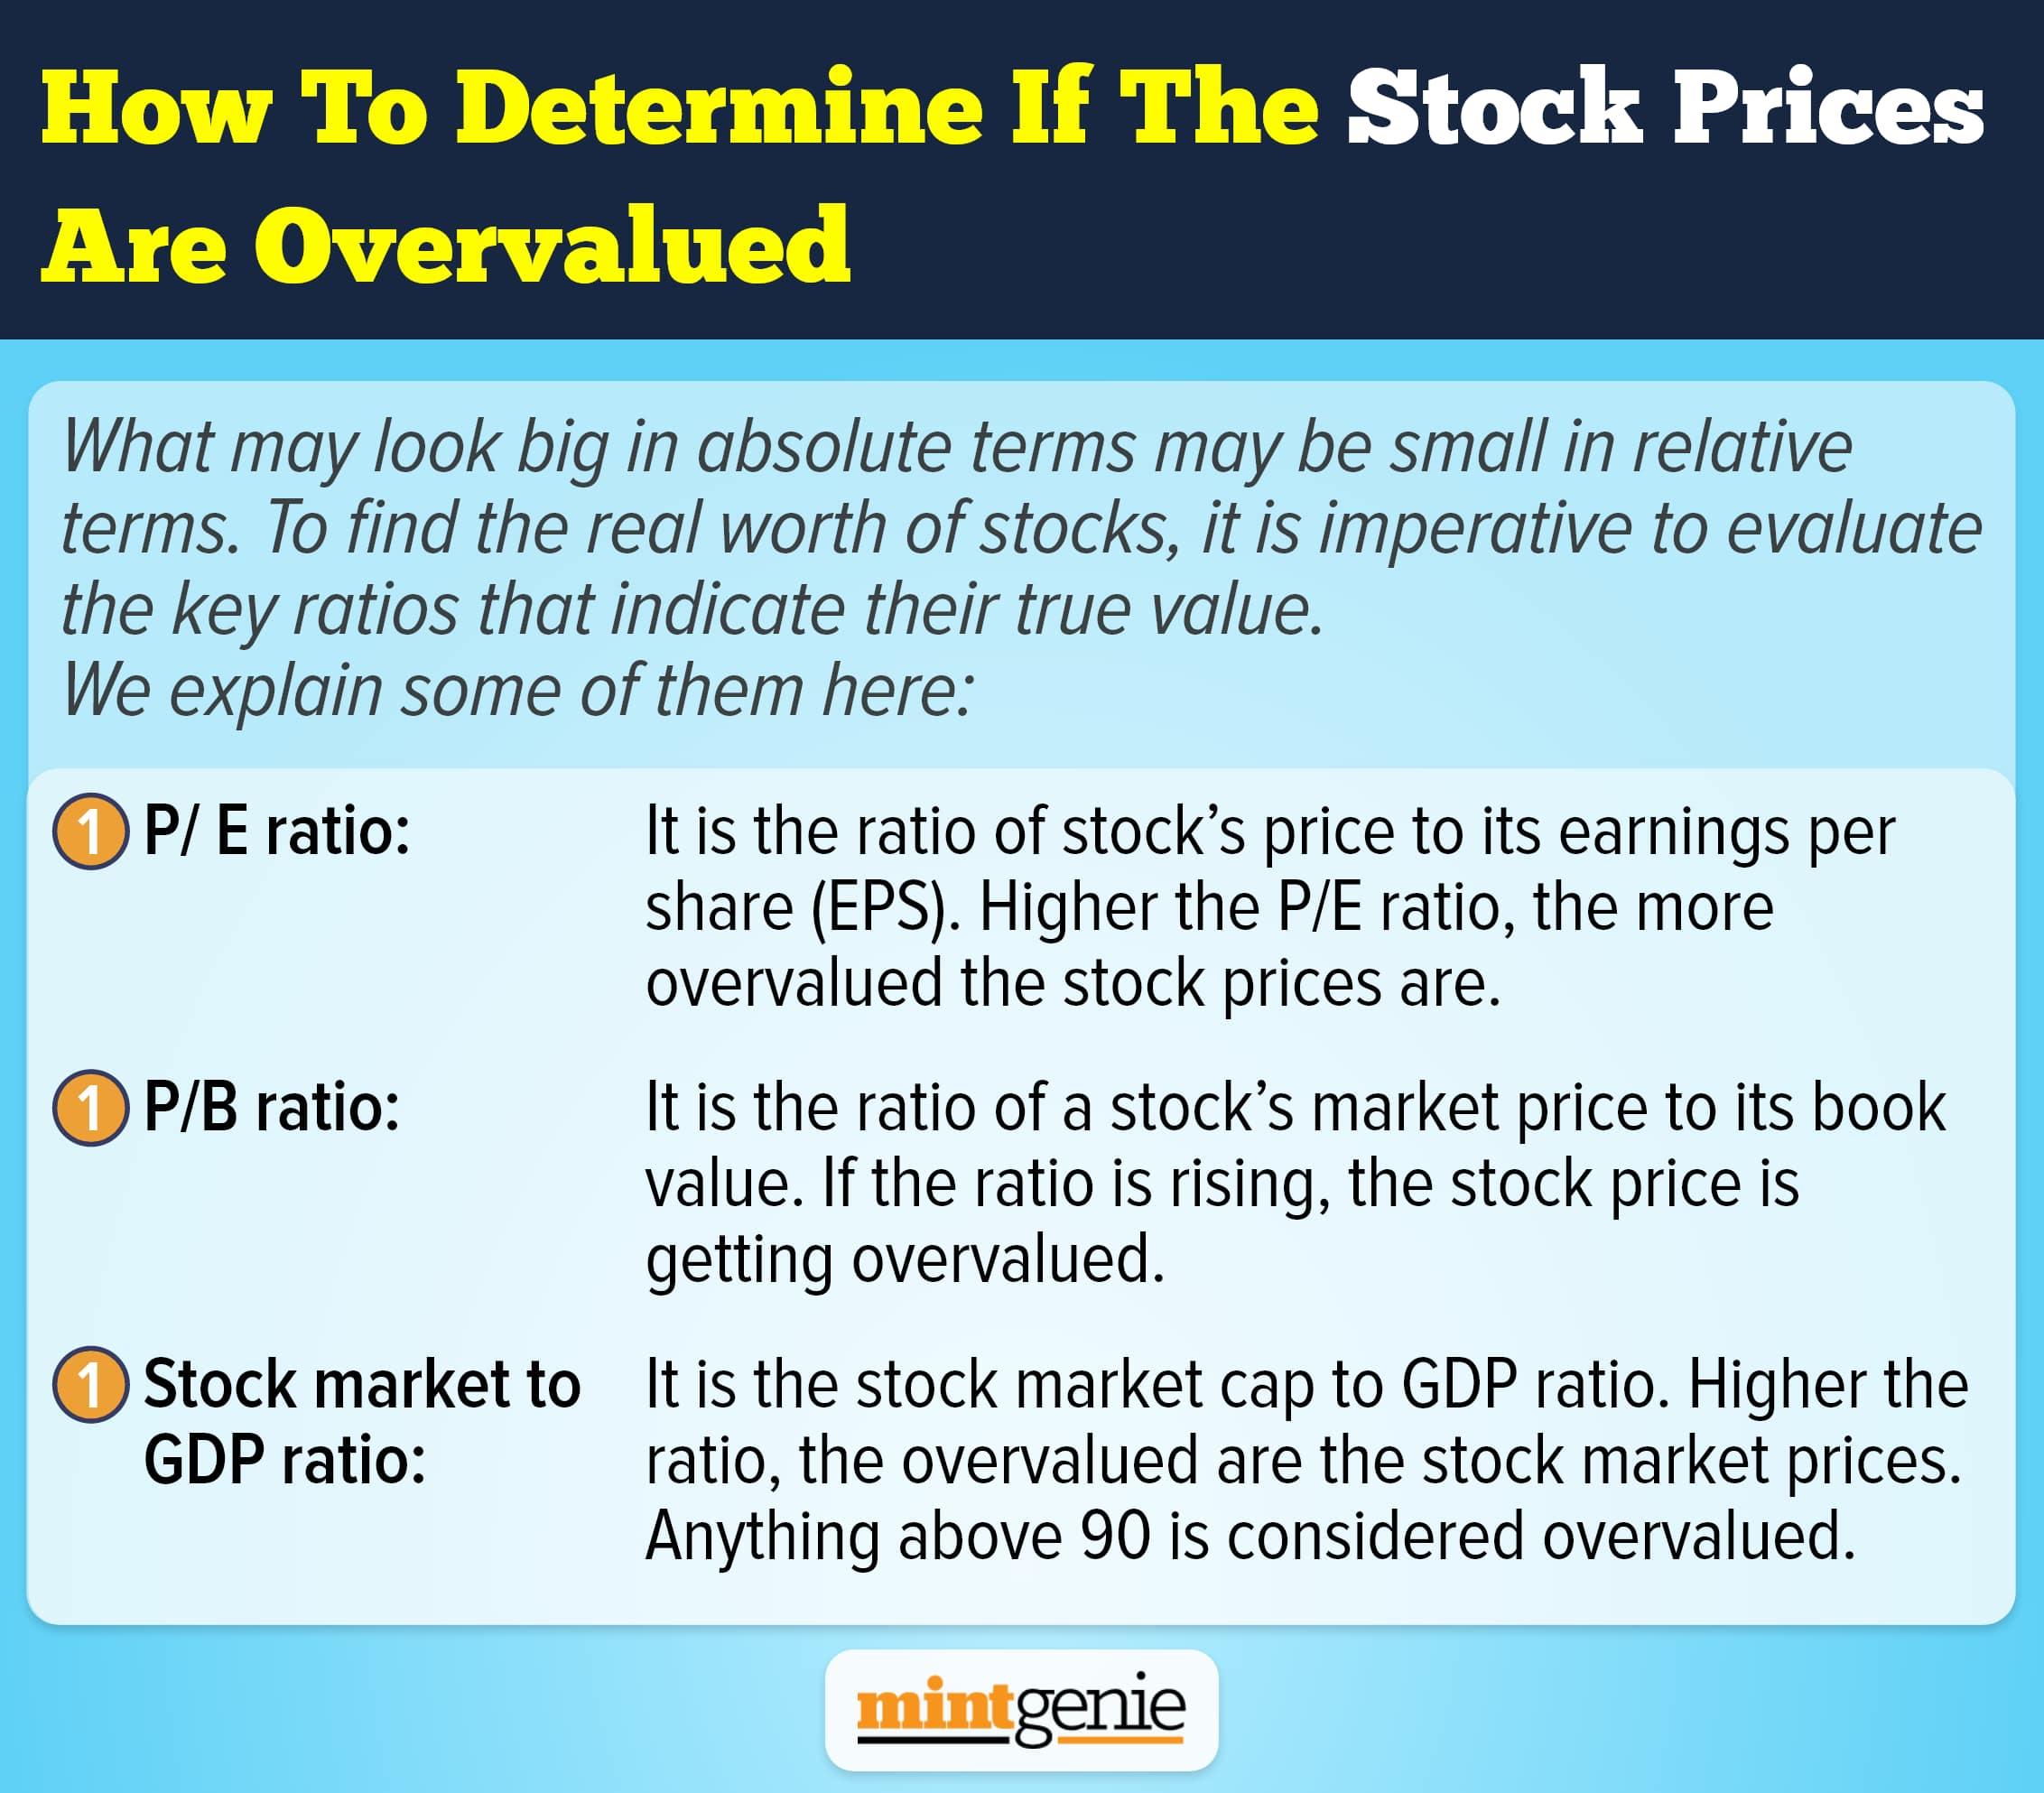 How to determine if the stock prices are overvalued.